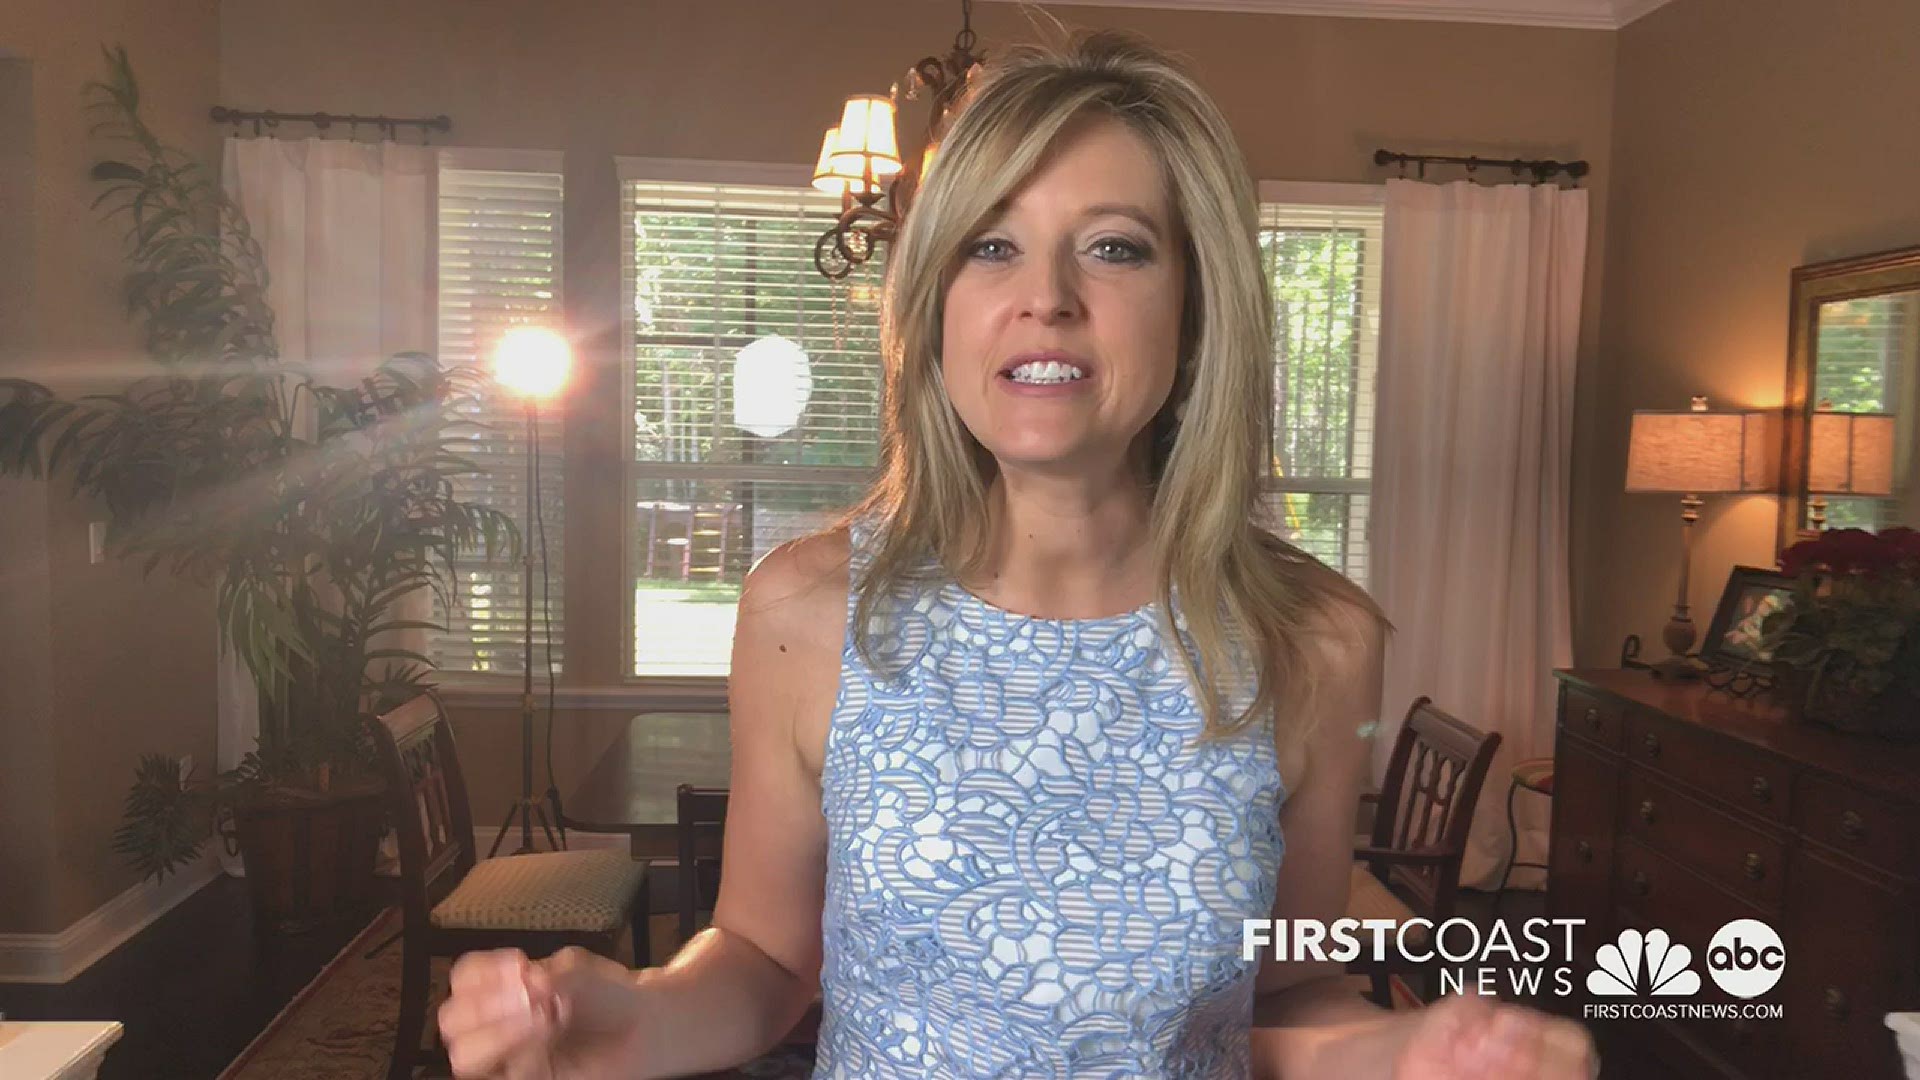 Heather Crawford with First Coast News shares some of the lessons she has learned along the way.